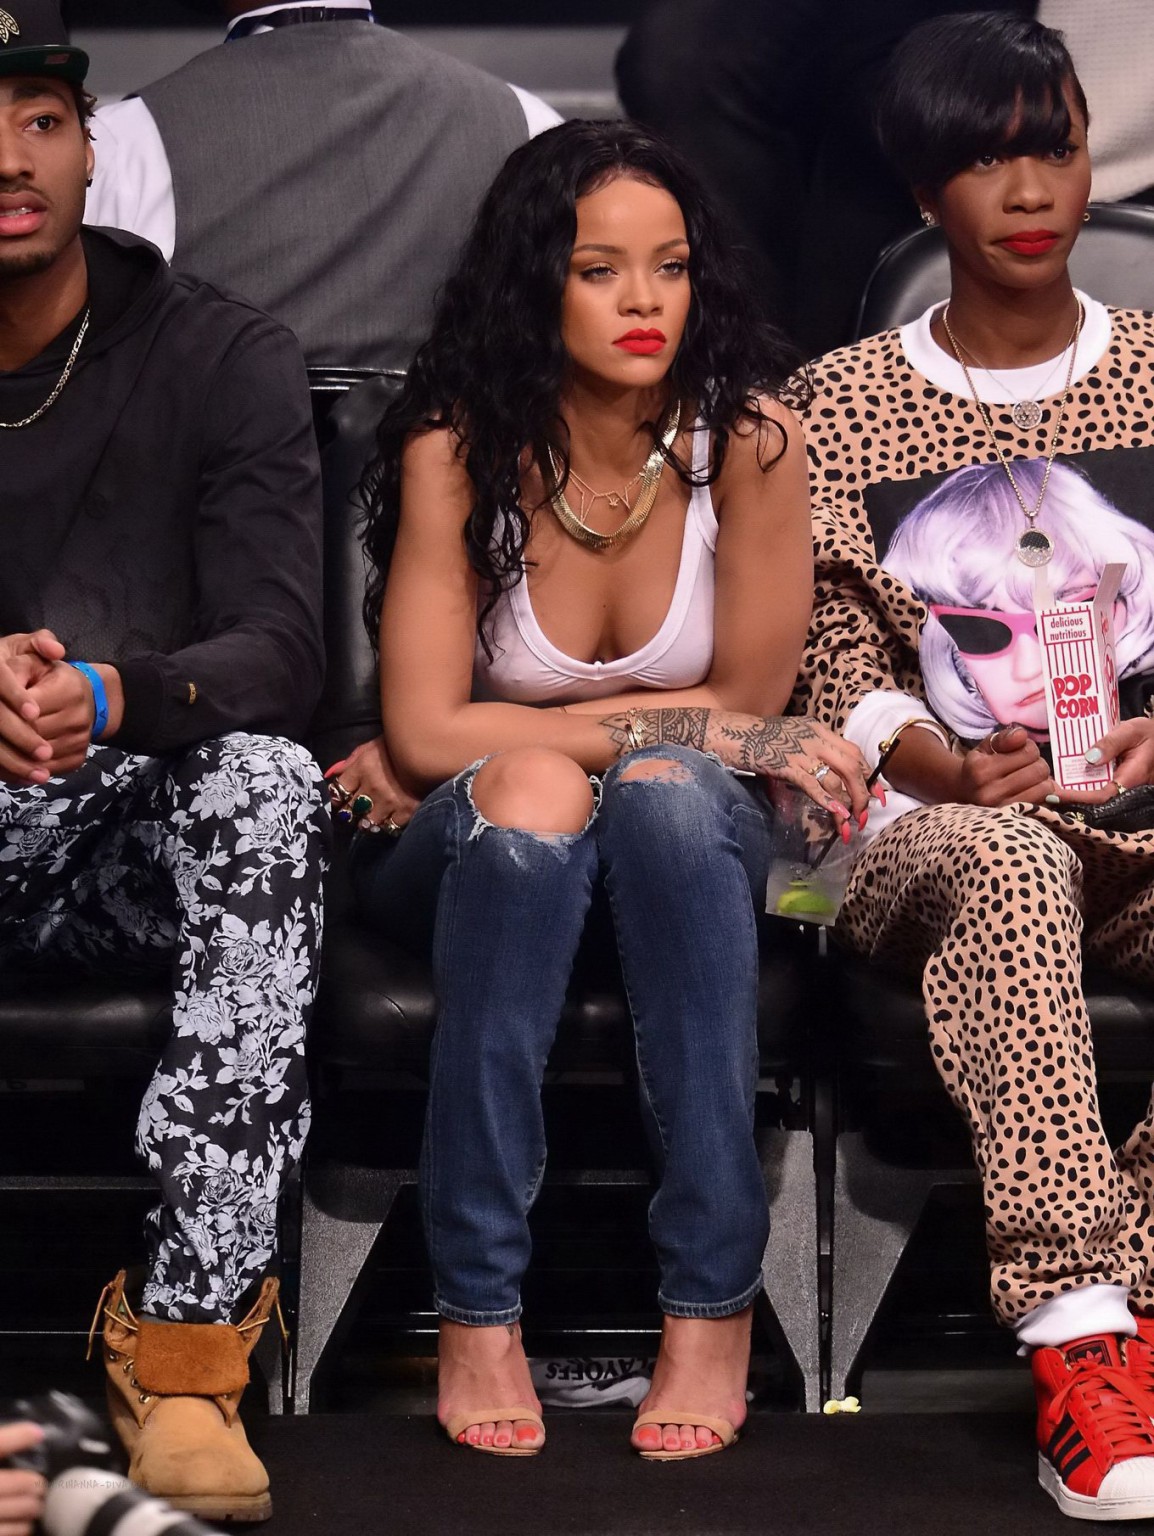 Rihanna shows off her boobs in seethru top at a basketball game in NYC #75198078